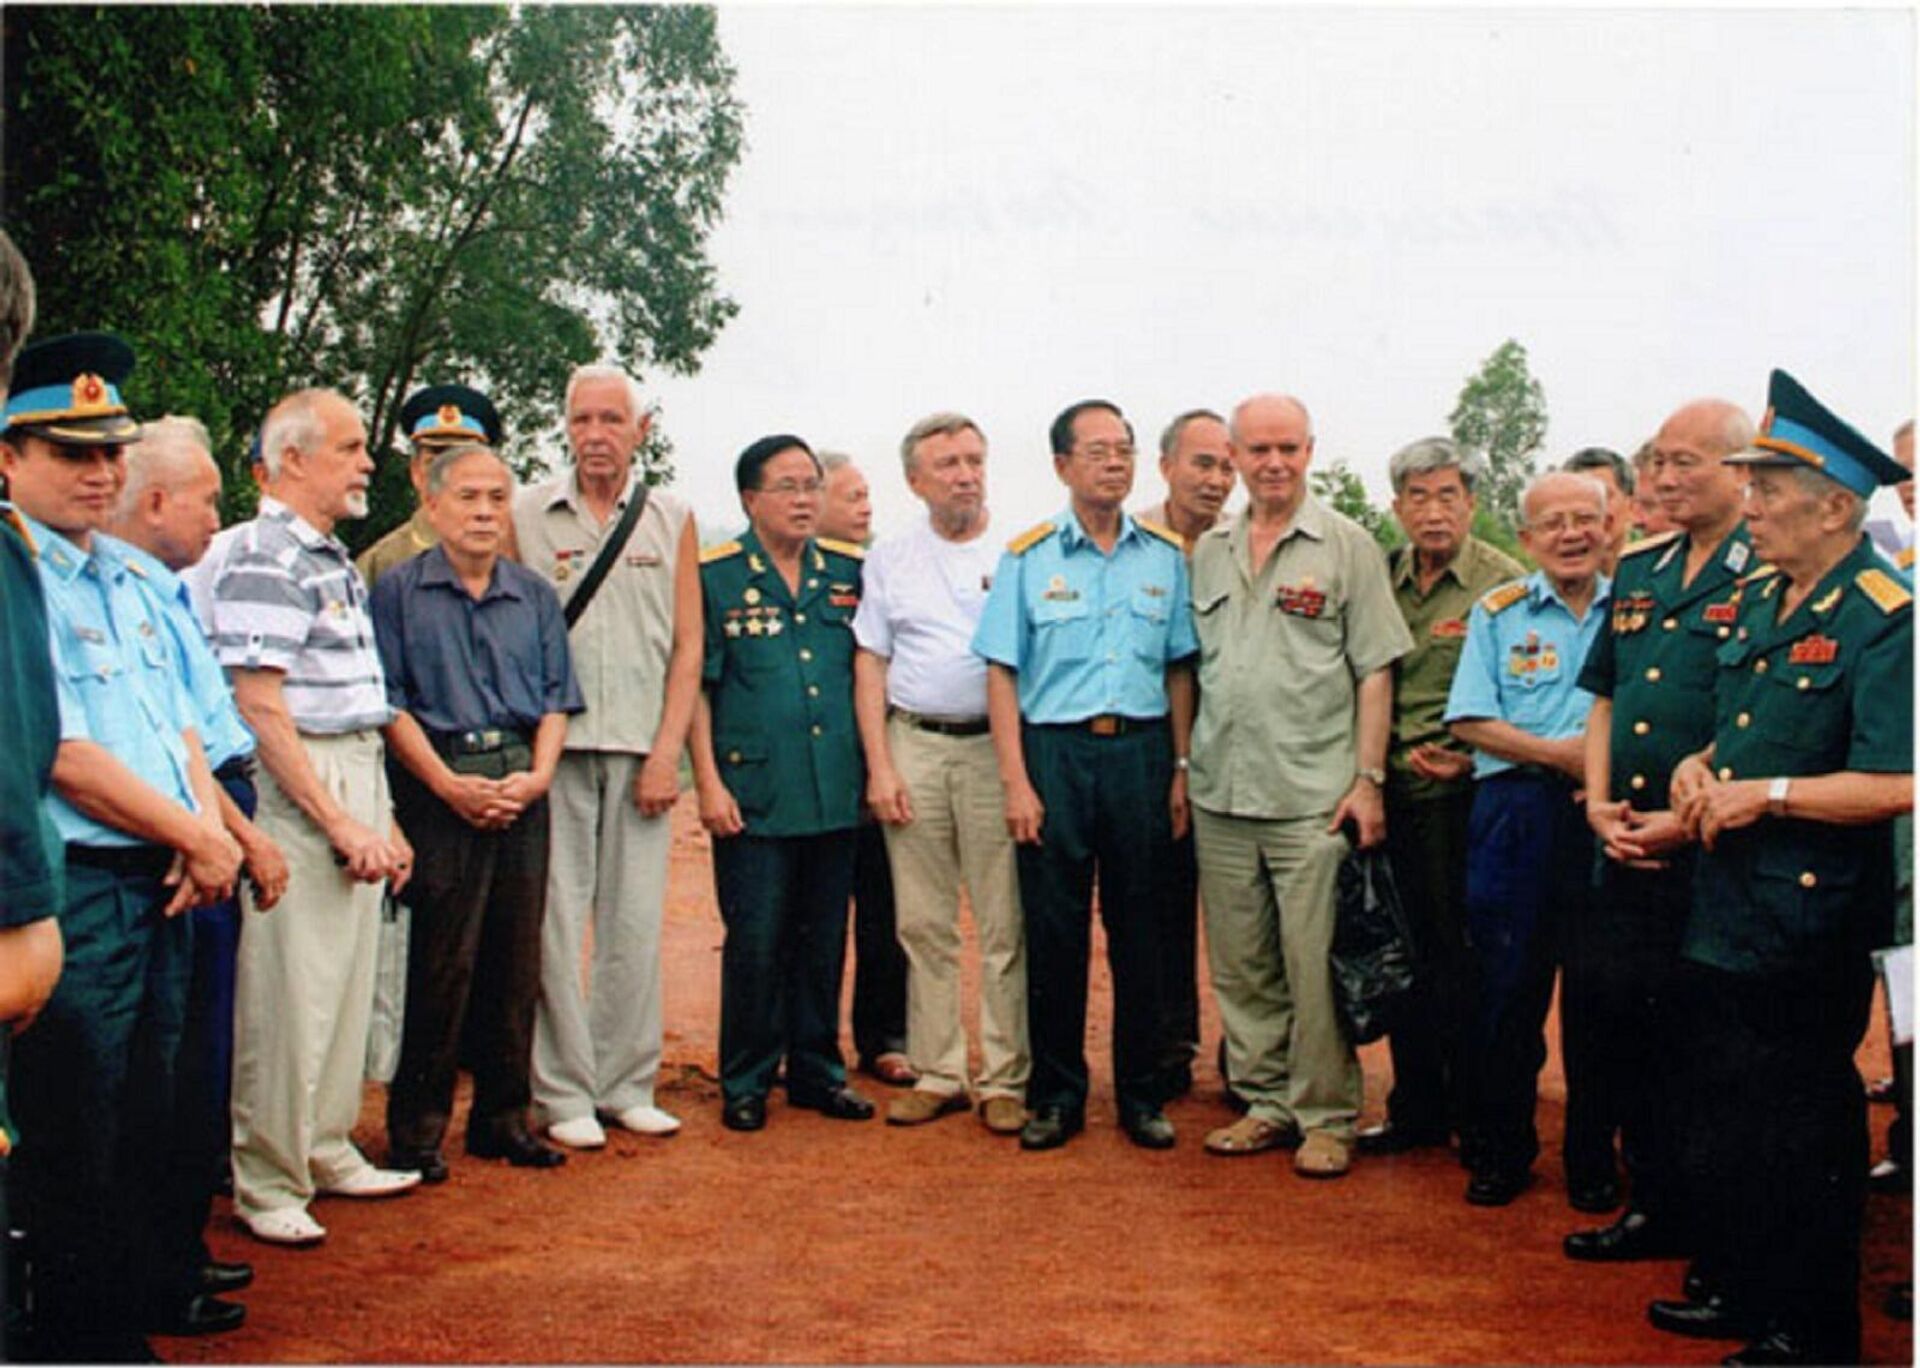 Meeting of the participants of the 1st anti-aircraft missile battle 50 years later at the site of the former SAM system combat position, Vietnam, July 24, 2015. - Sputnik International, 1920, 28.03.2023